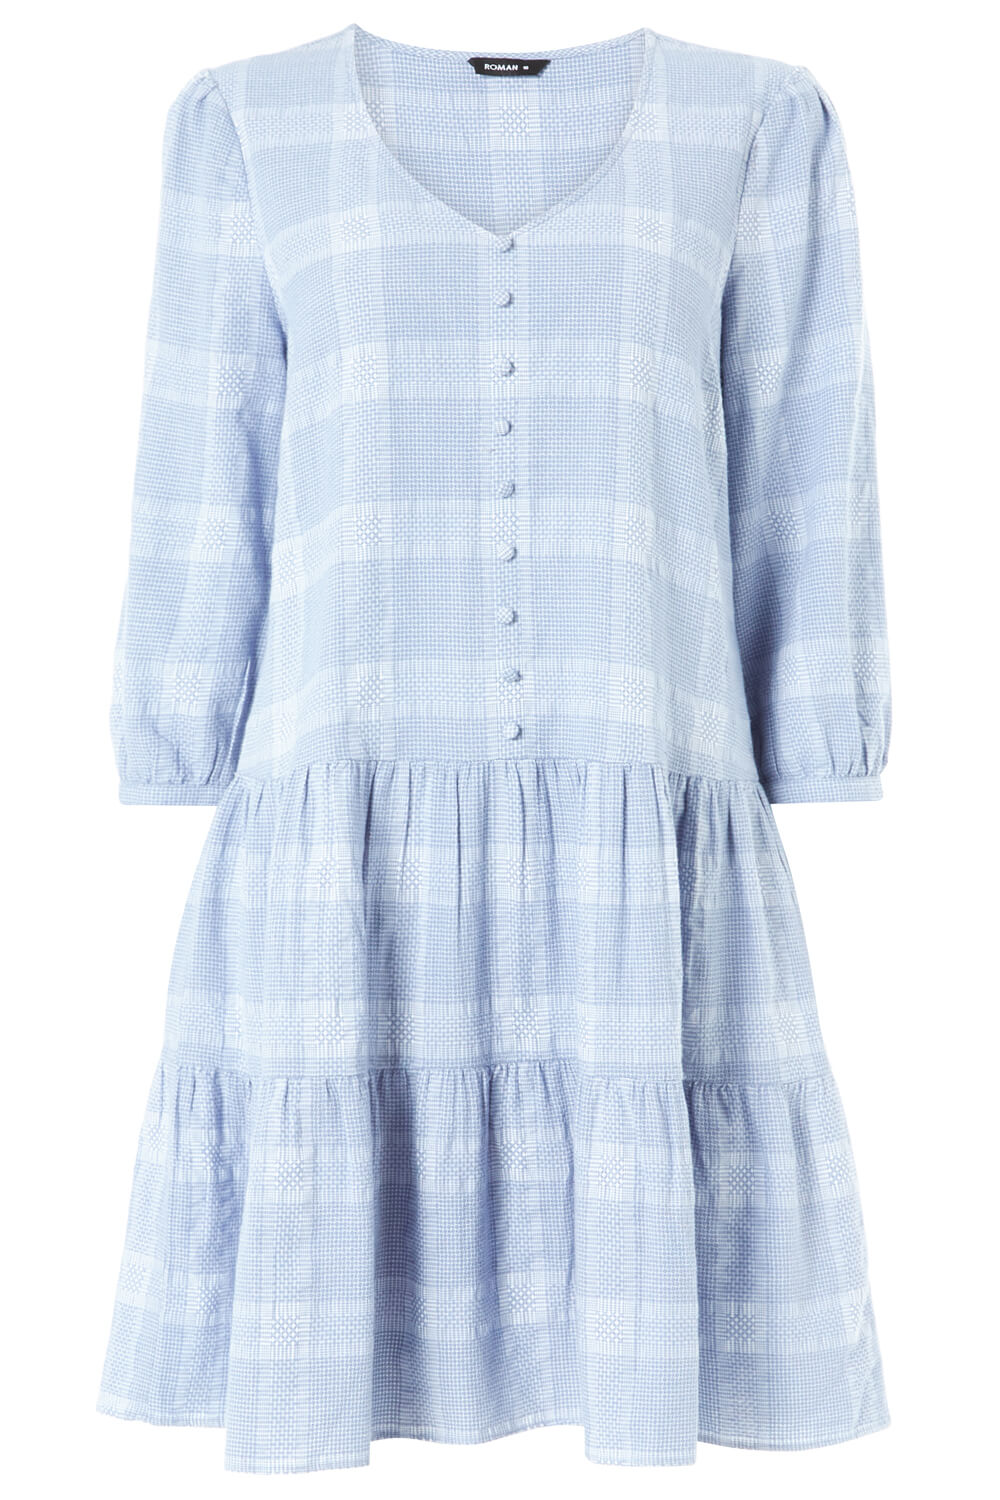 Blue Check Tiered Swing Dress, Image 5 of 5